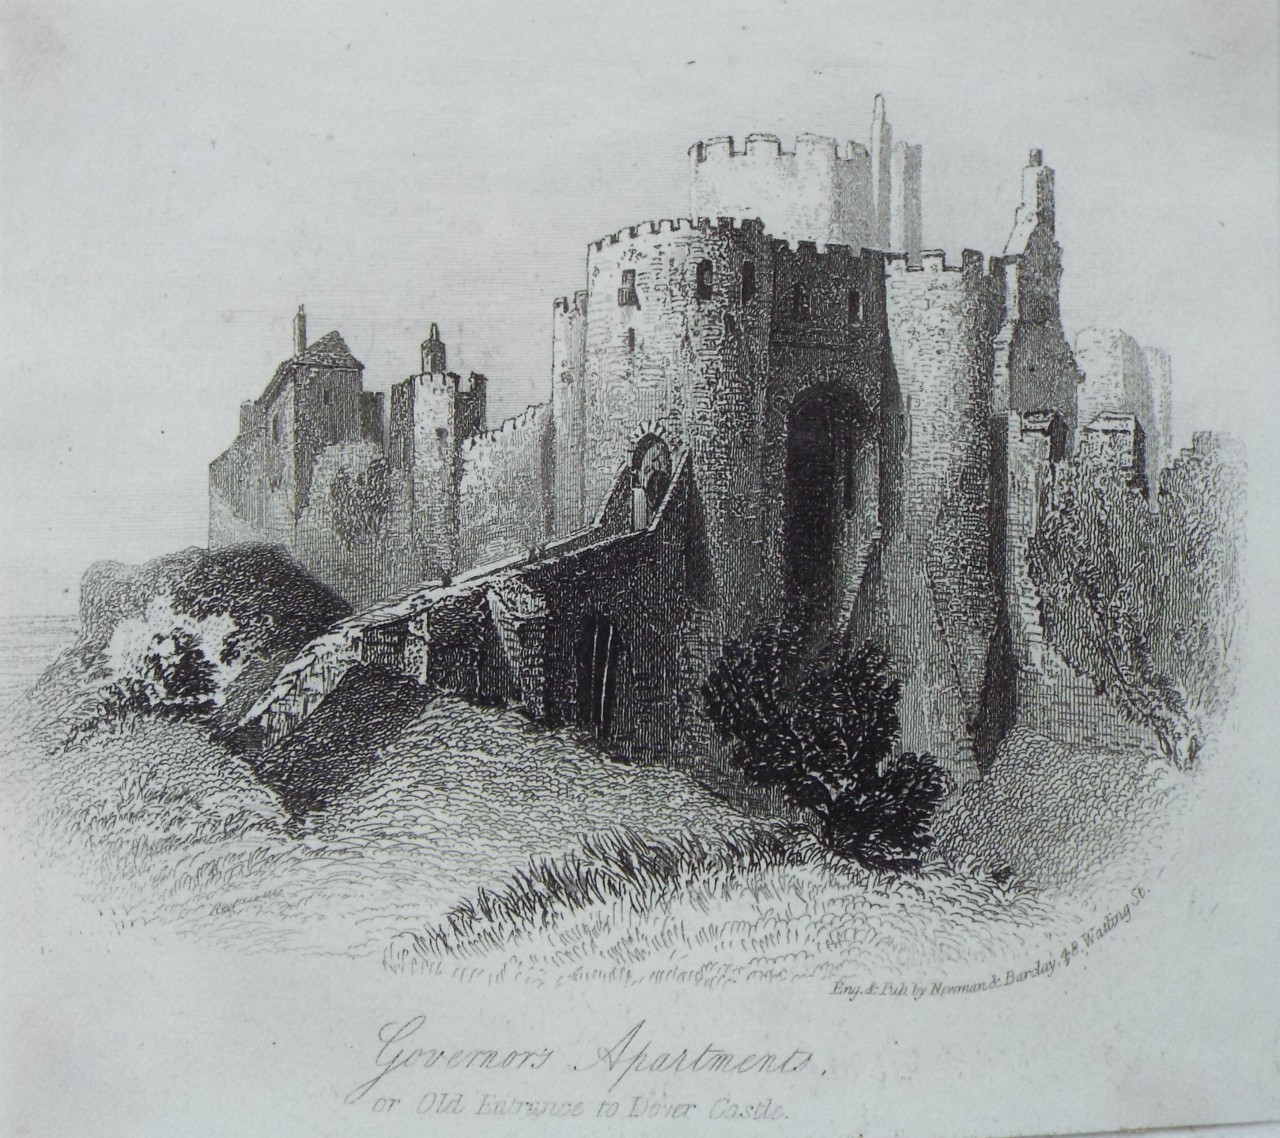 Steel Vignette - Governor's Appartments, or Old Entrance to Dover Castle. - Newman